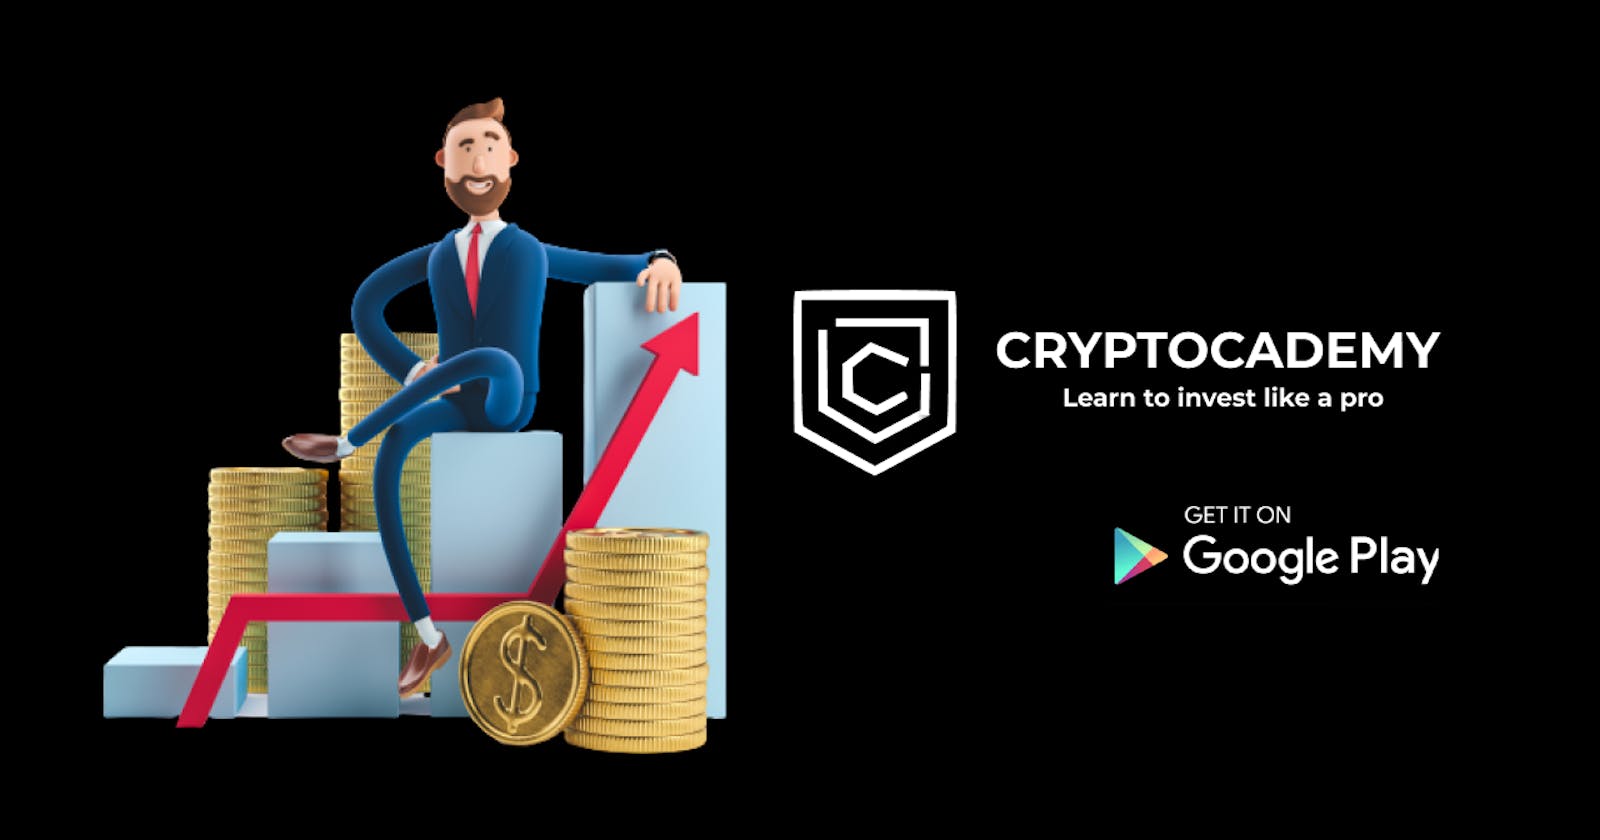 Introducing Cryptocademy: A real time crypto trading simulator